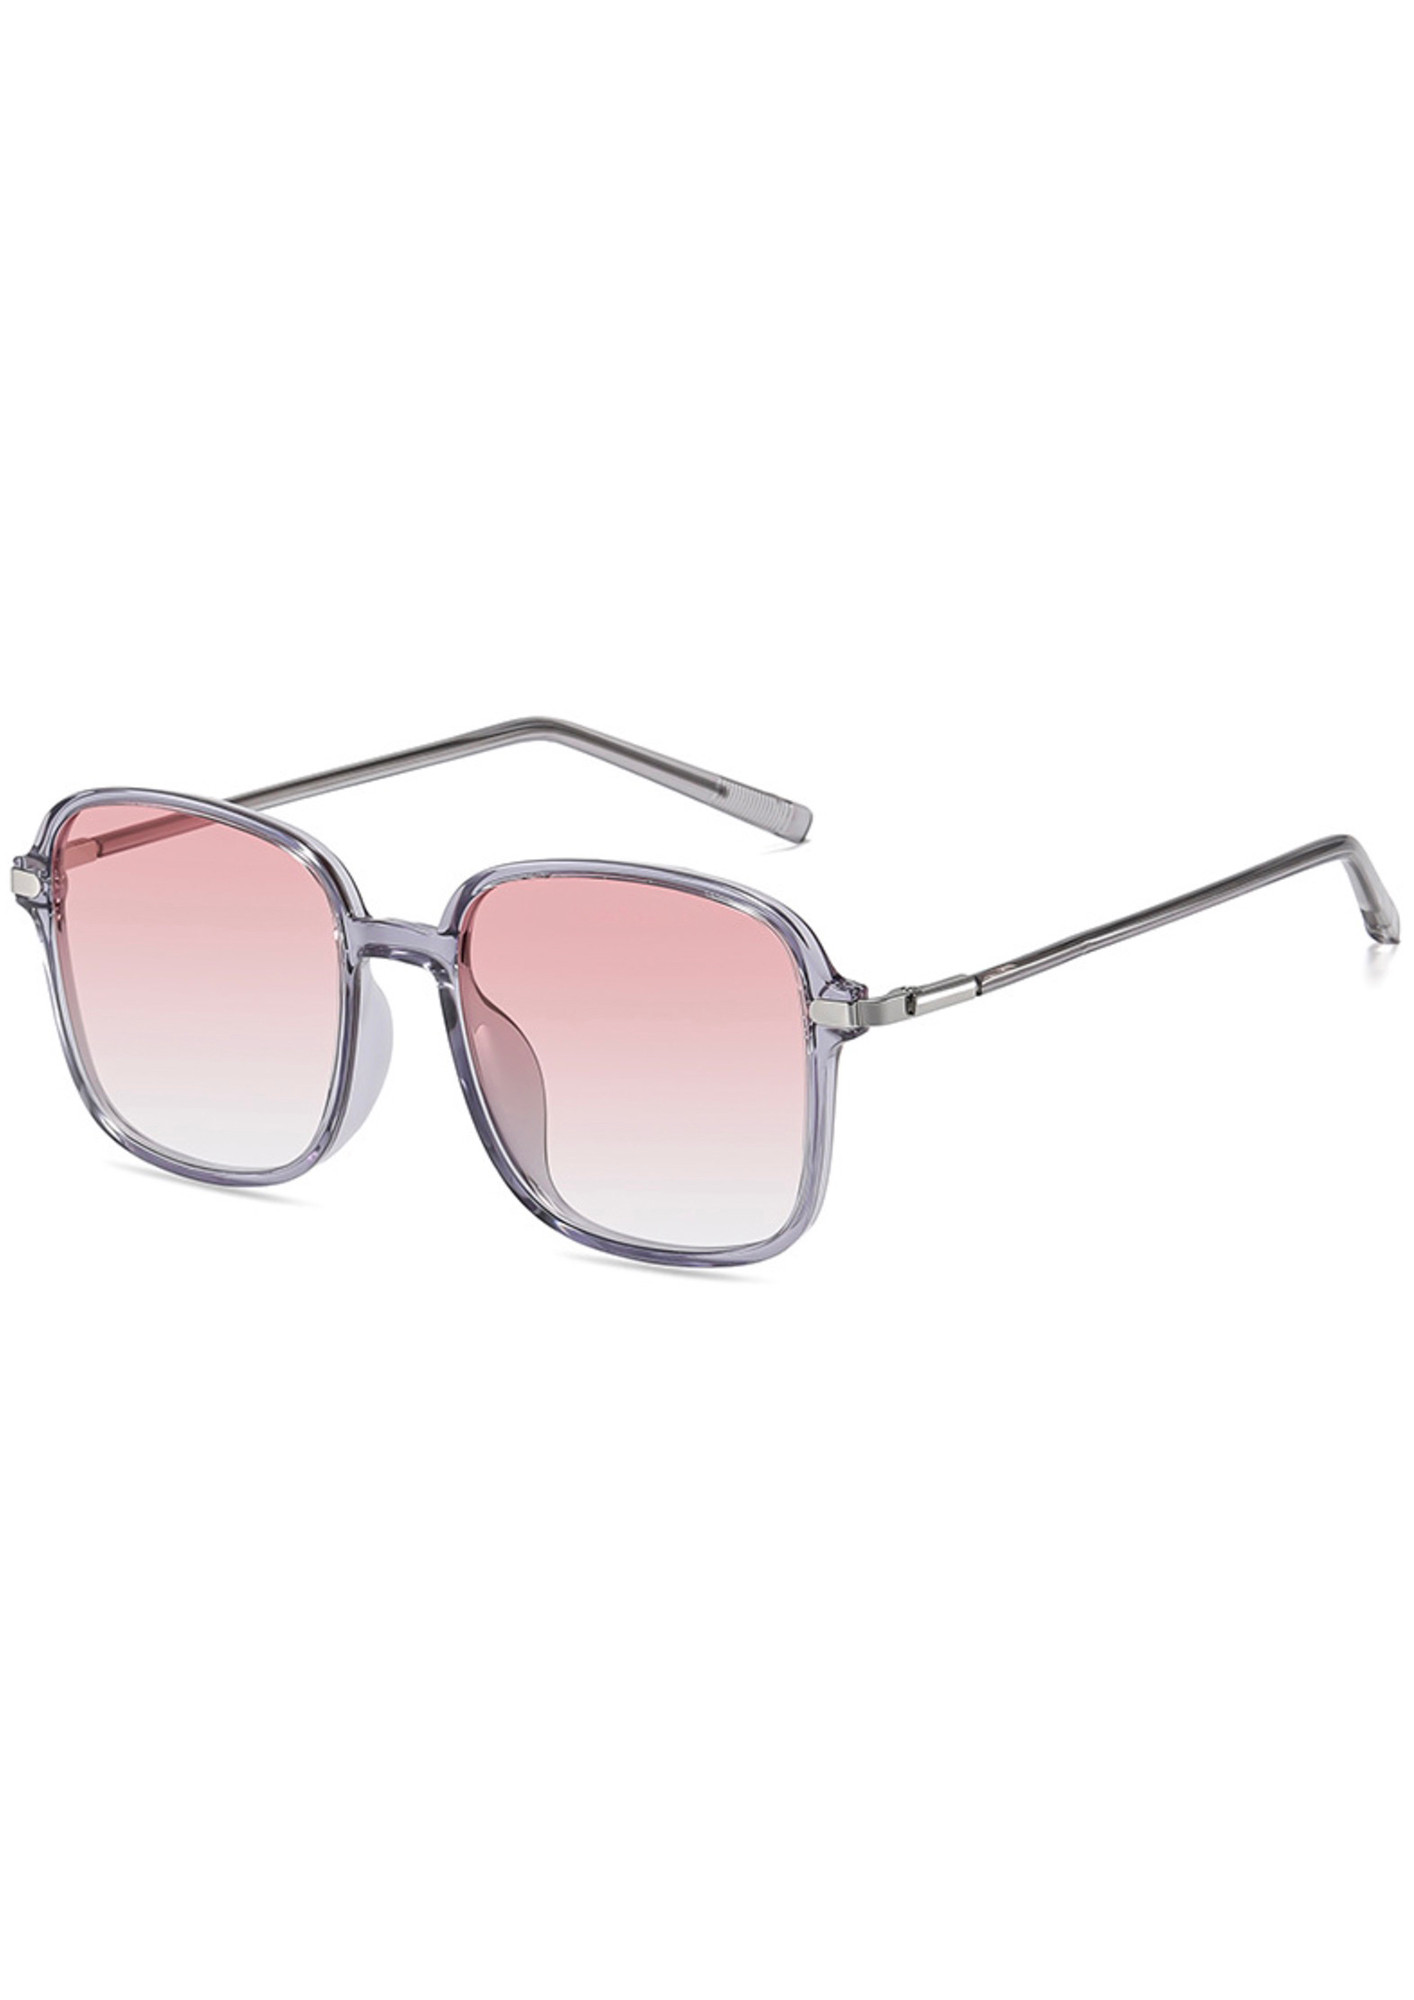 Buy Fossil Pink Square Sunglasses for Women at Best Price @ Tata CLiQ